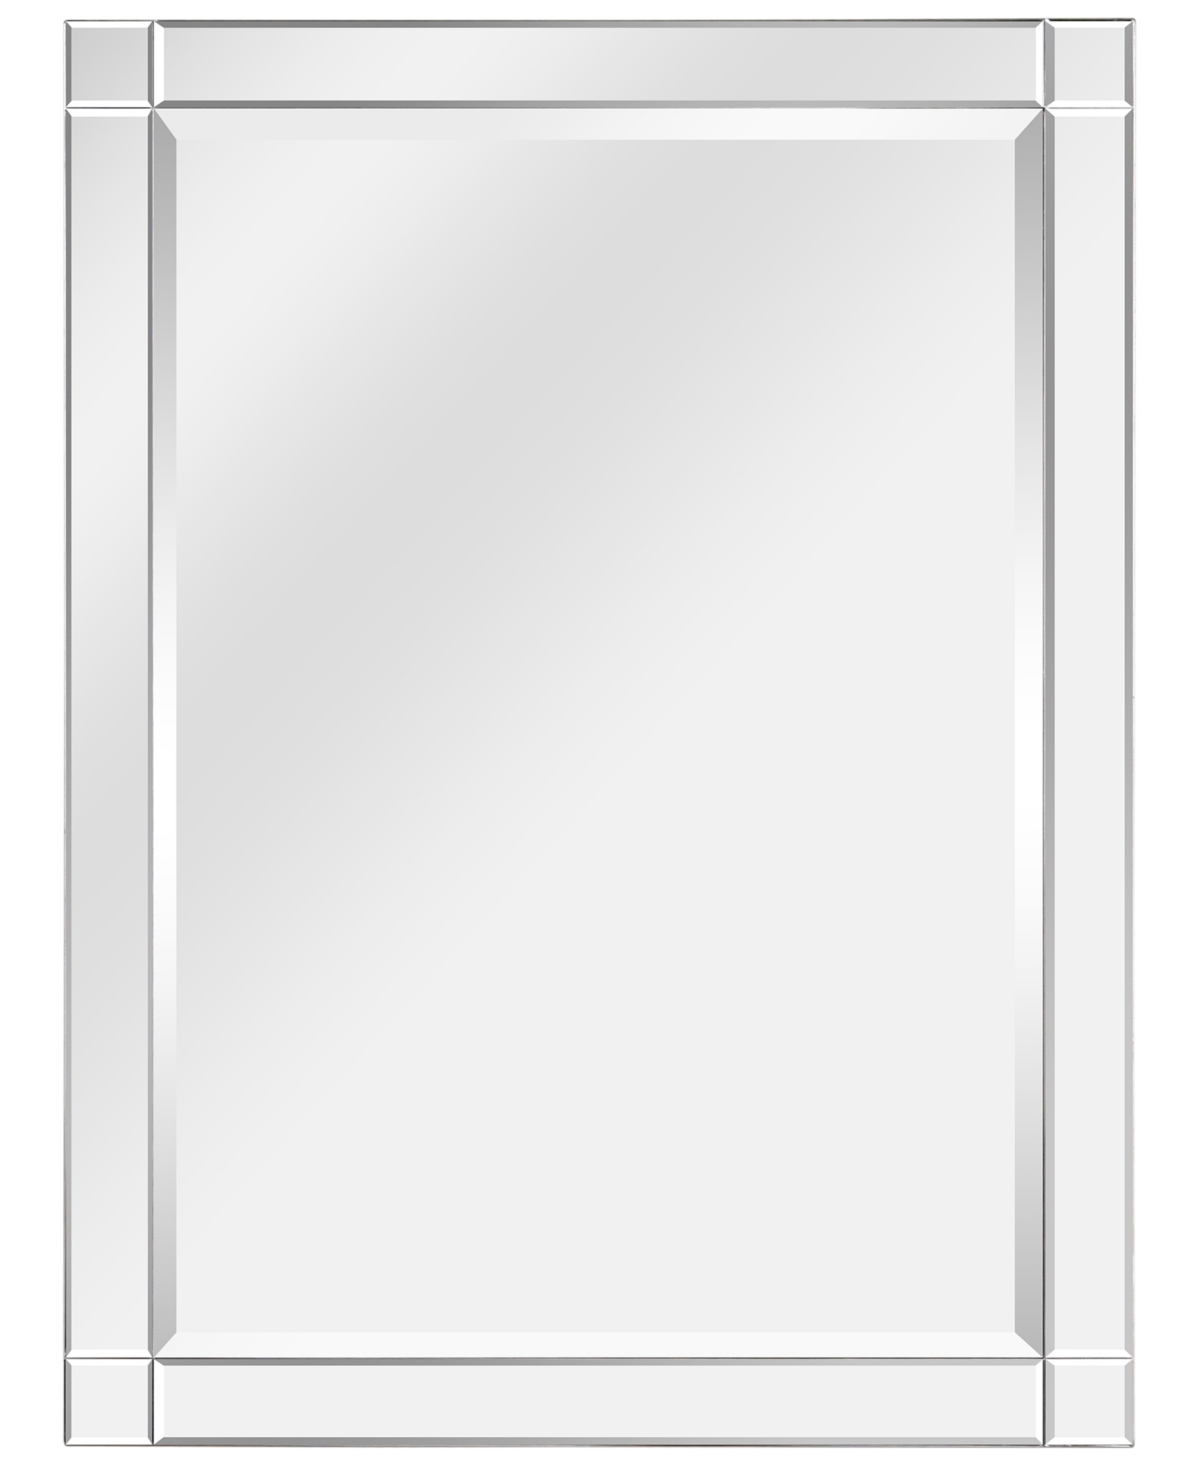 Moderno Squared Corner Beveled Rectangle Wall Mirror, 40" x 30" x 1.18" - Clear